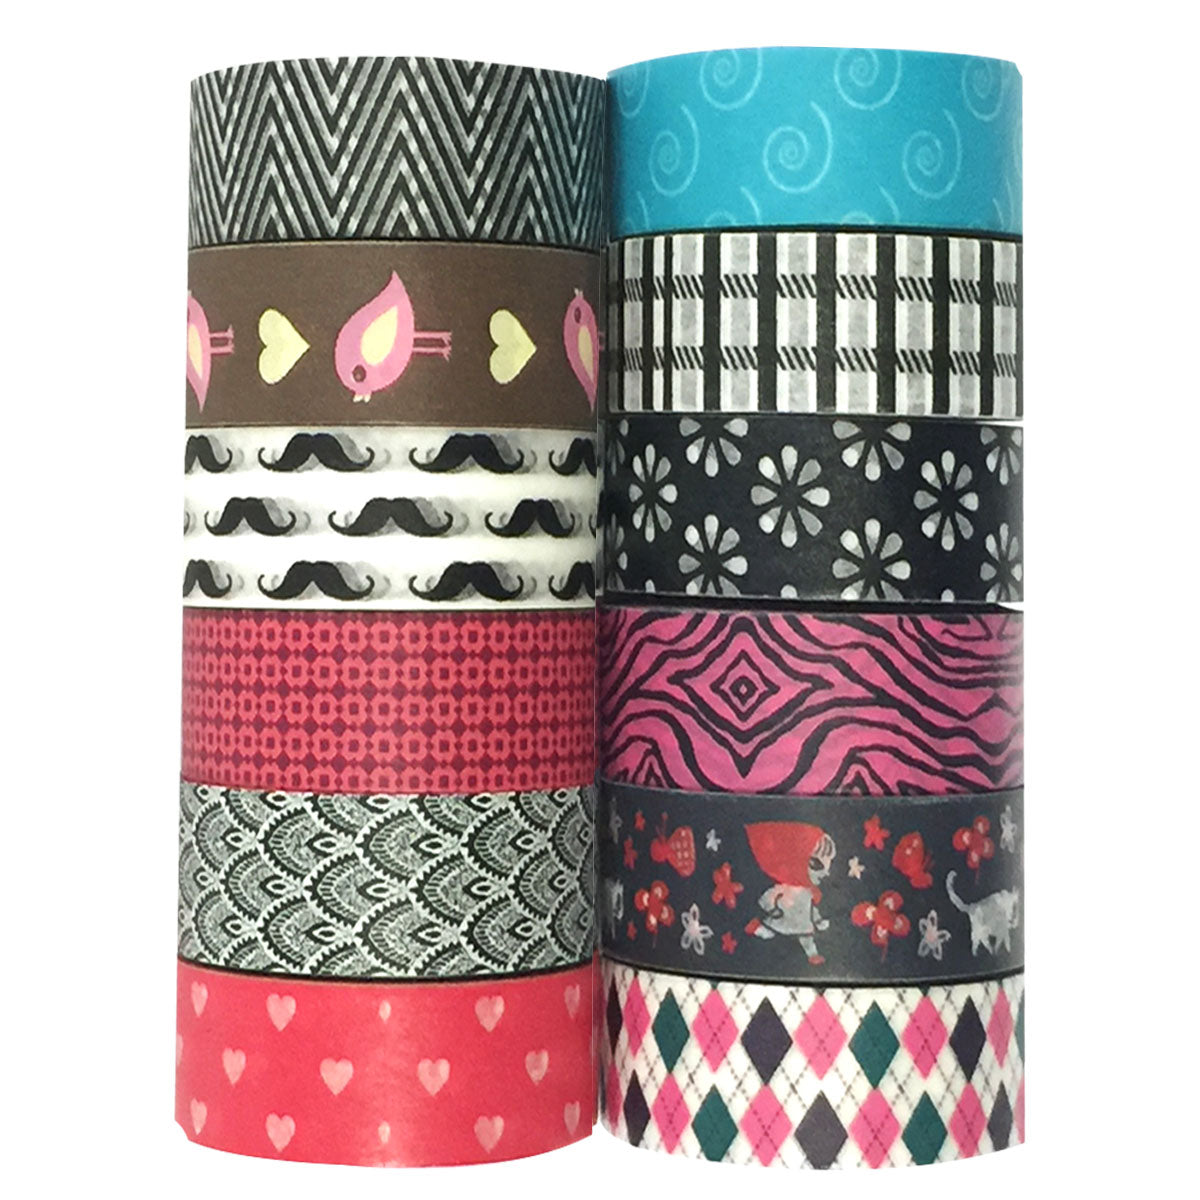 Wrapables Decorative Lace Tape (Set of 3), Hot Pink, Black, White, 3 Pieces  - Ralphs